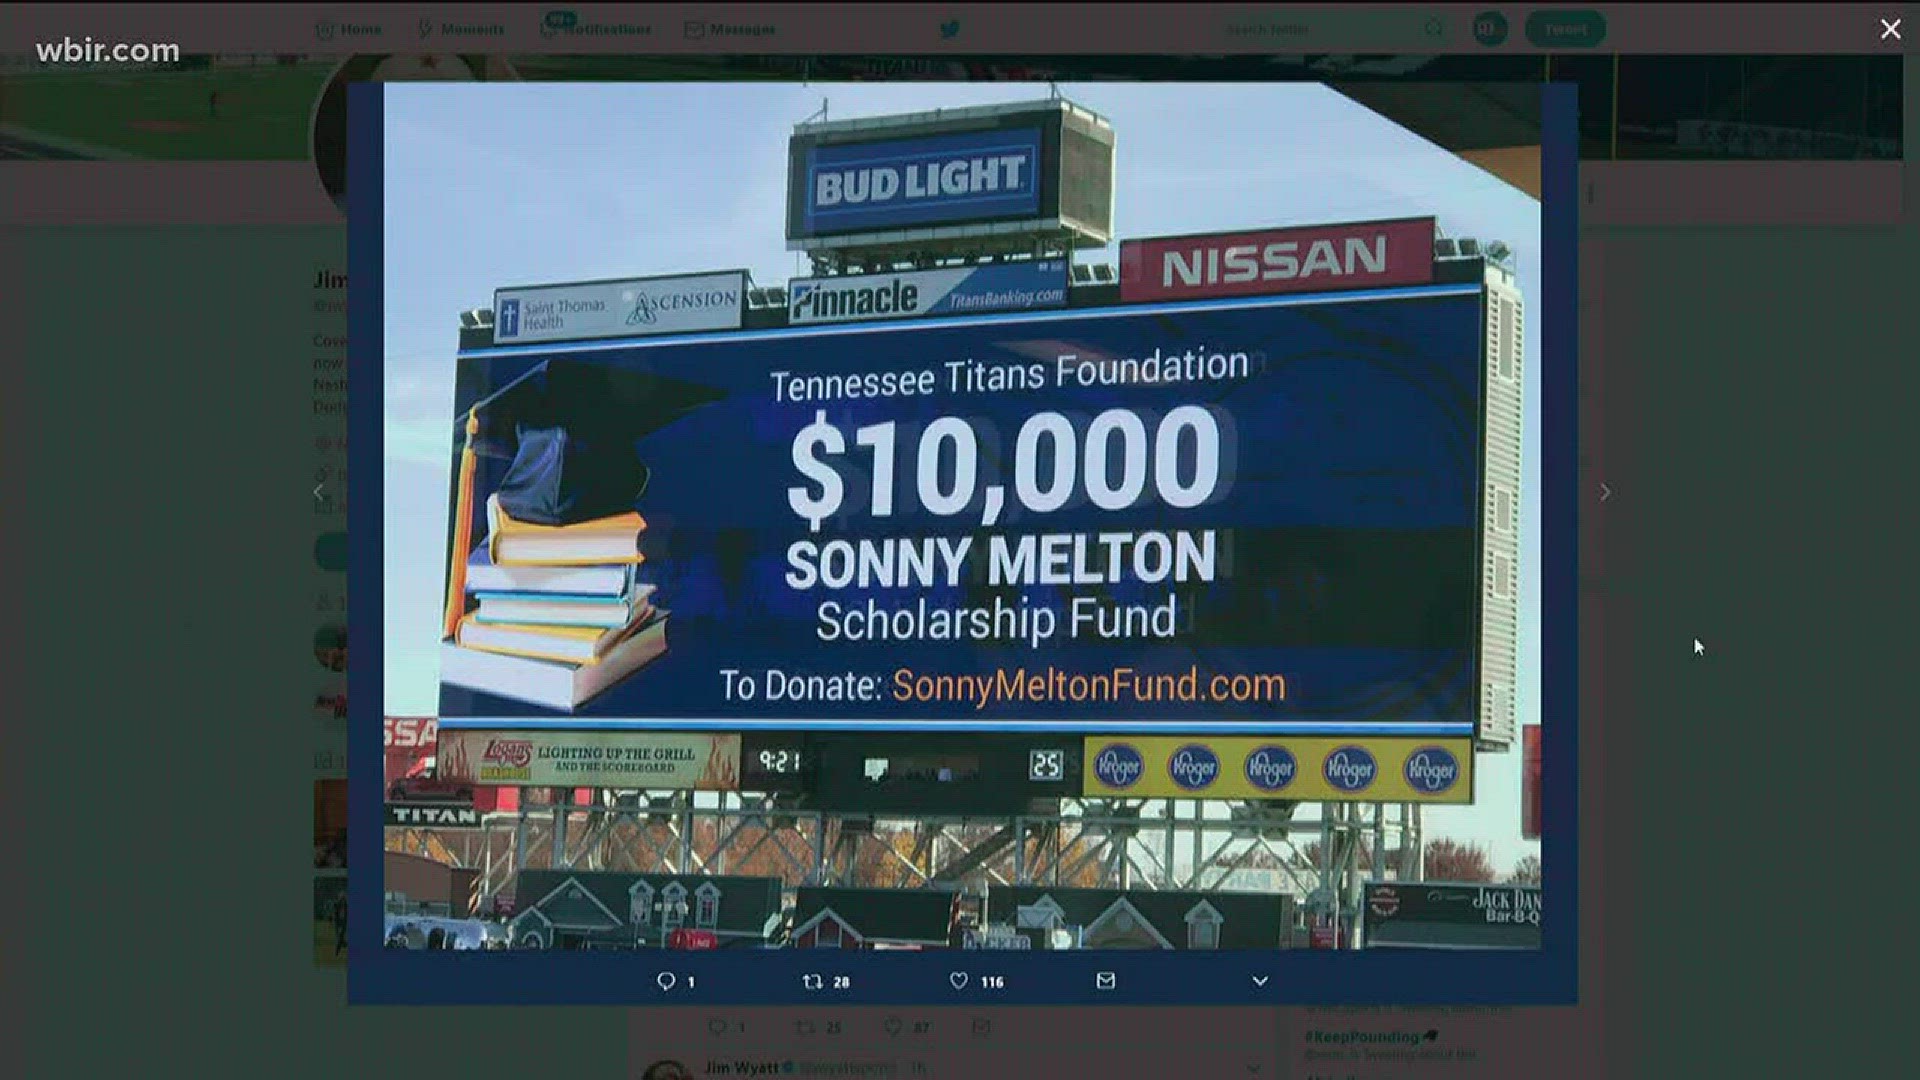 Heather Melton was honored at the Tennessee Titans game Sunday afternoon. More than $10,000 was donated to the Sonny Melton scholarship fund.